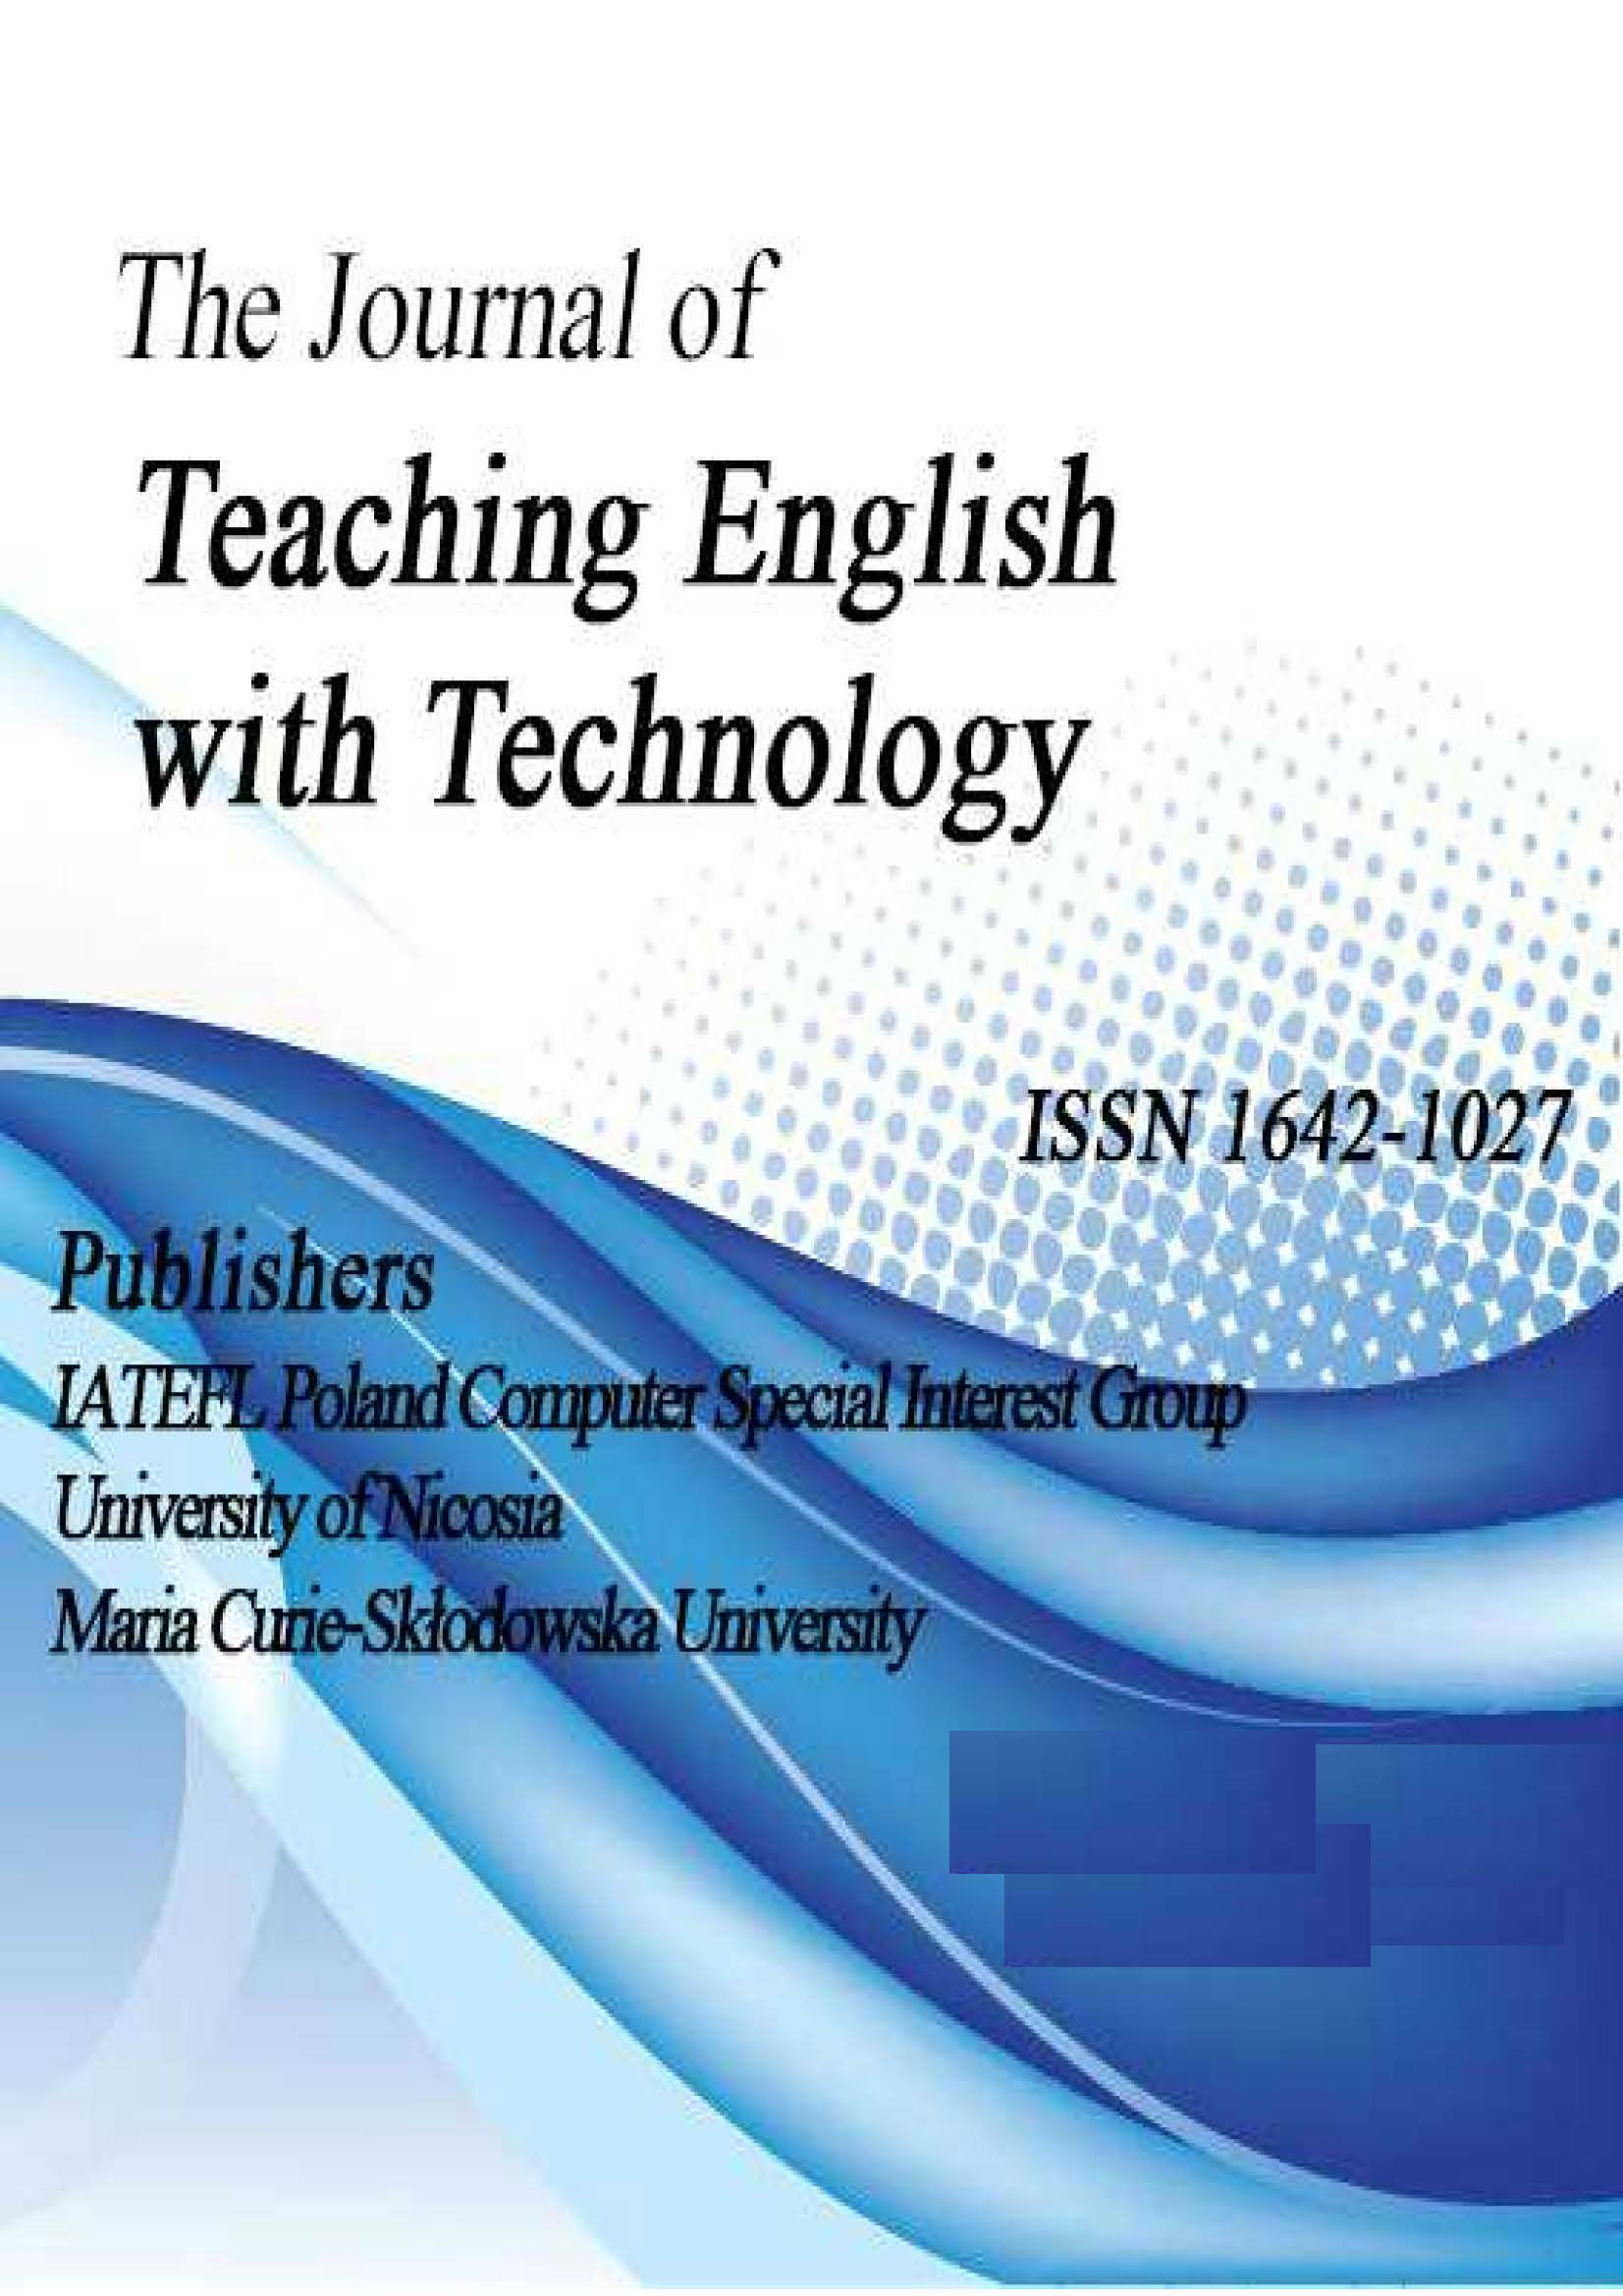 THE EFFECT OF ONLINE DICTIONARIES USAGE ON EFL UNDERGRADUATE STUDENTS’ AUTONOMY